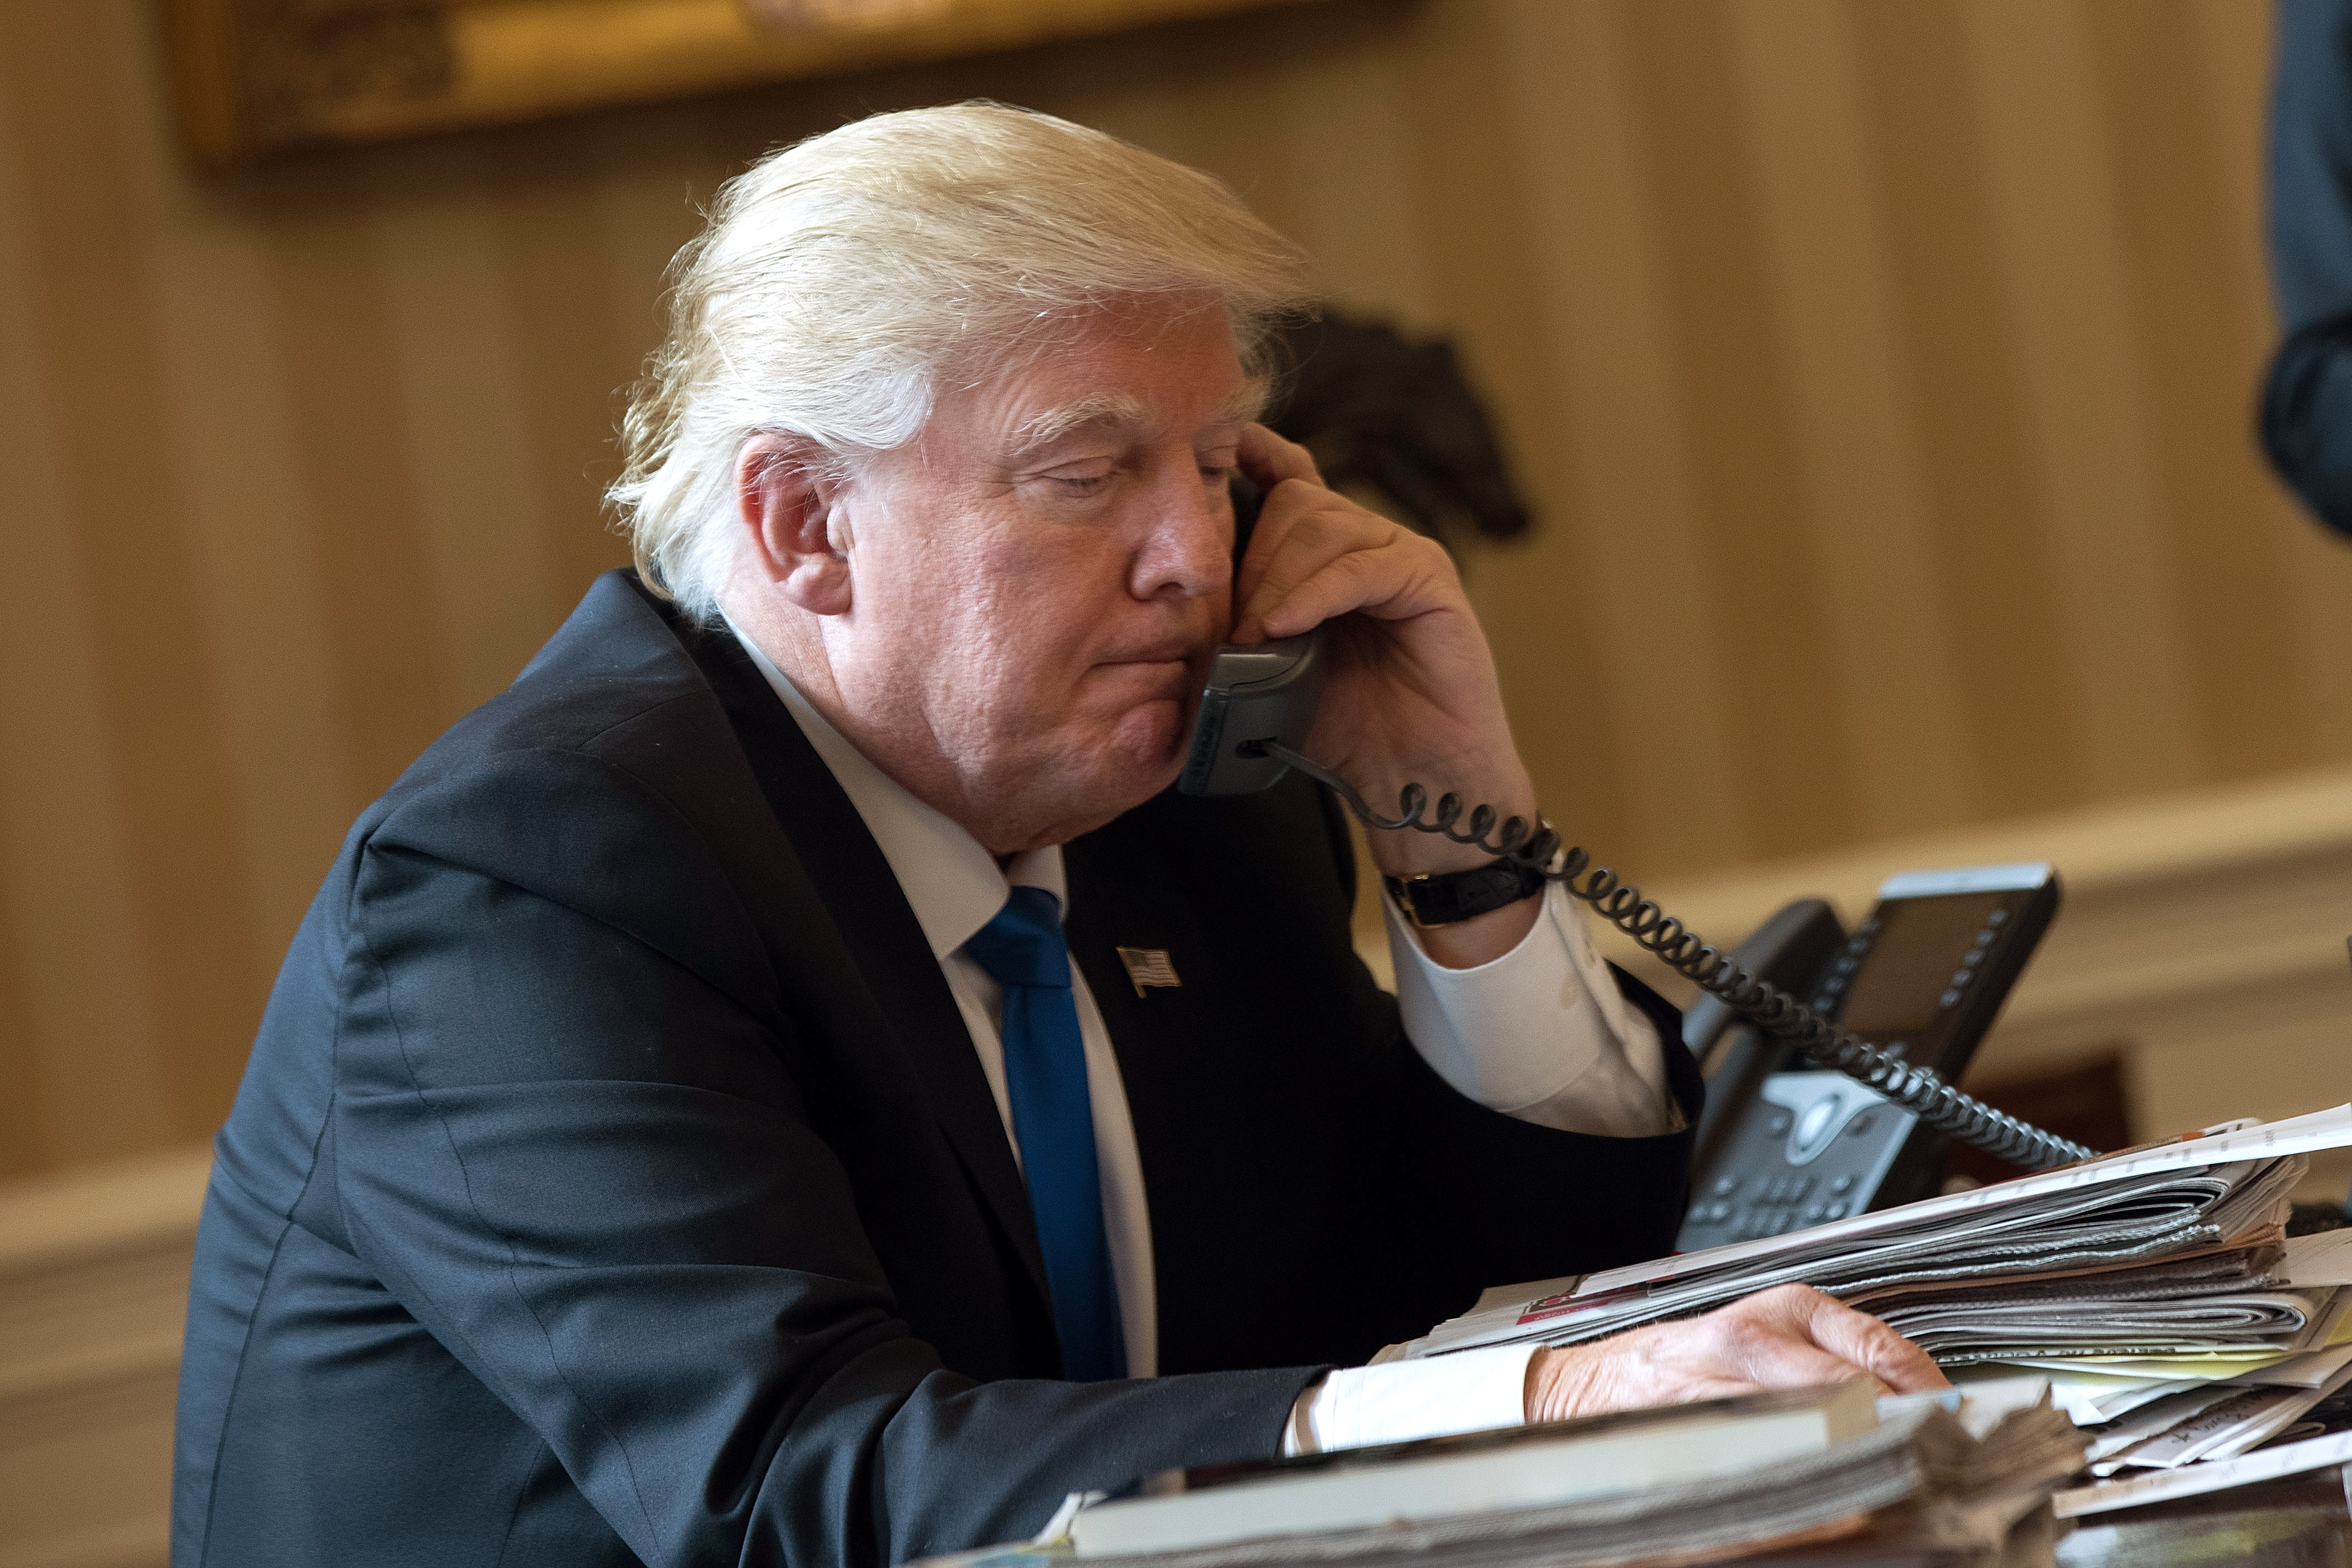 what type of smartphone does president trump use, does donald trump use an android, does donald trump use an iphone, donald trump android, donald trump galaxy, donald trump phone, donald trump smartphone